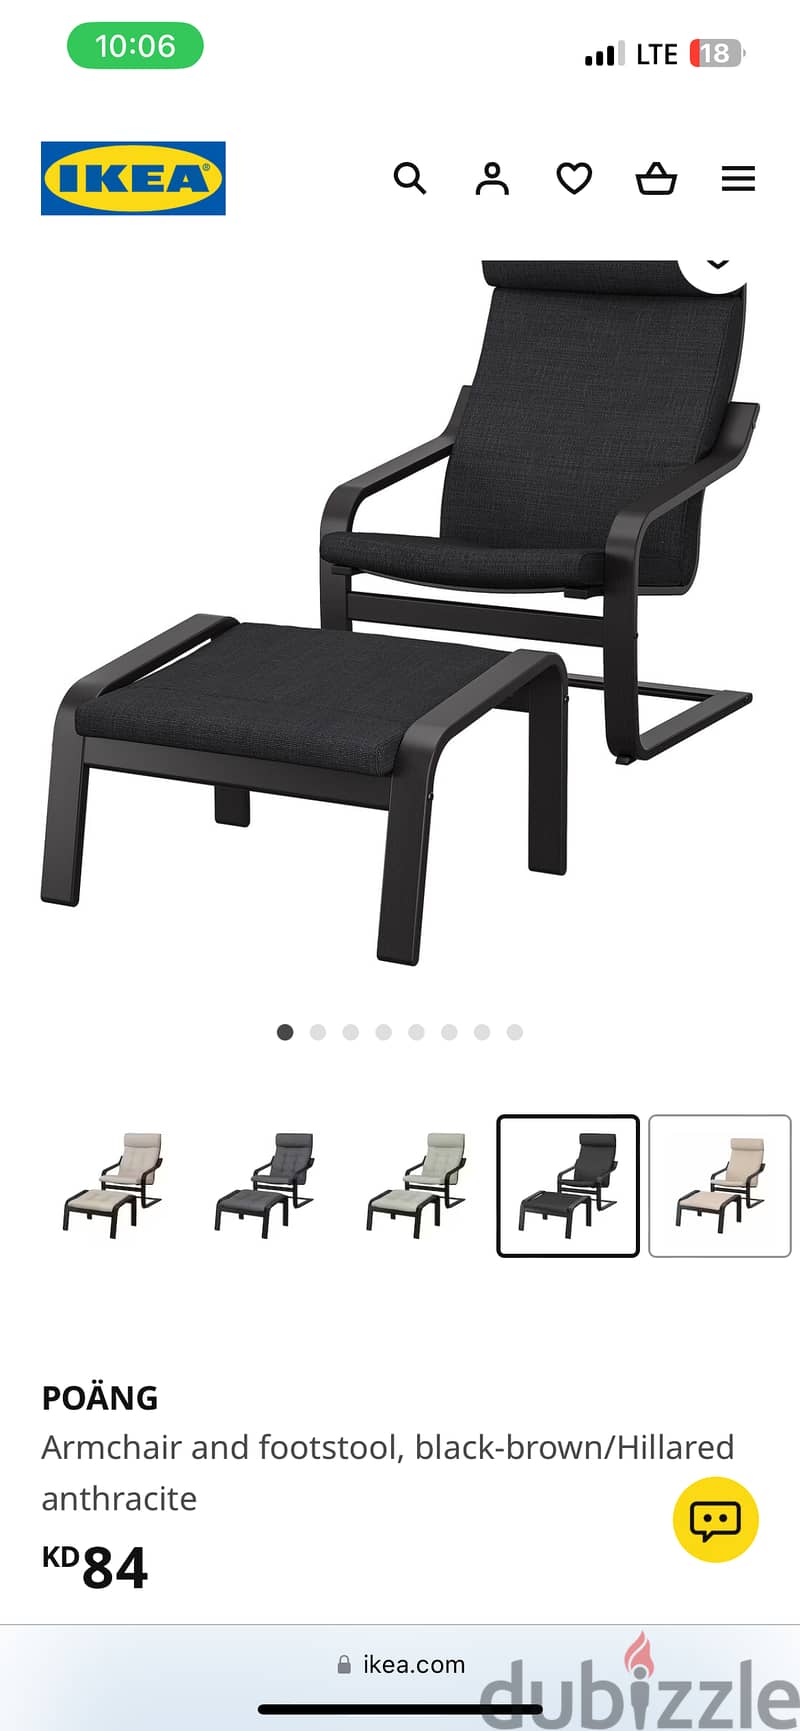 85KD IKEA Armchair & footstool for 40KD (leather 2 pcs) 2